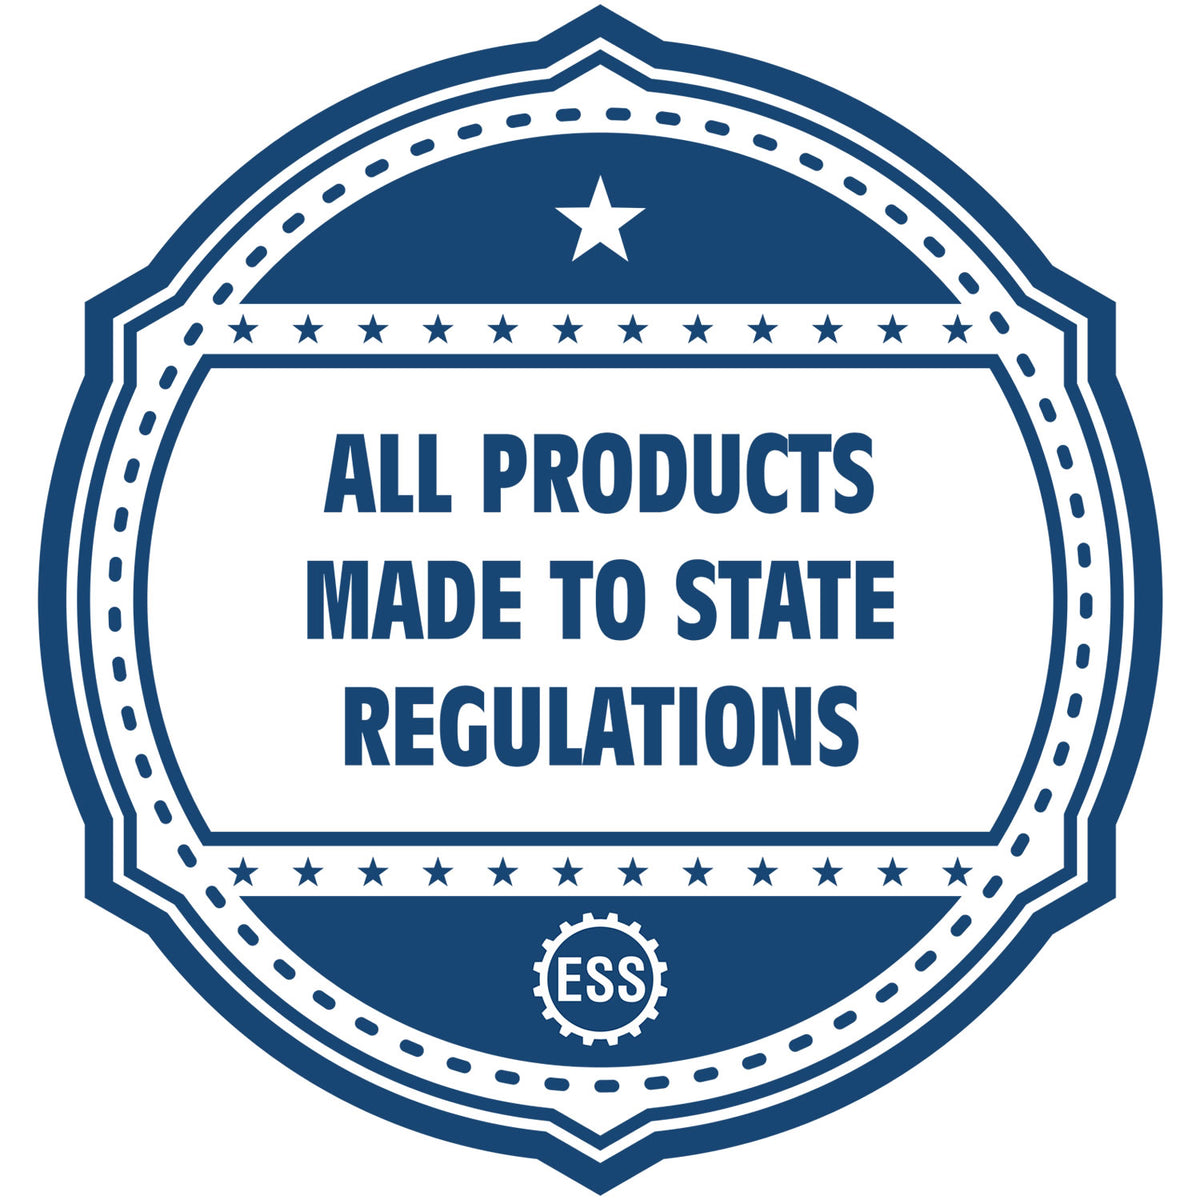 An icon or badge element for the Handheld Pennsylvania Architect Seal Embosser showing that this product is made in compliance with state regulations.